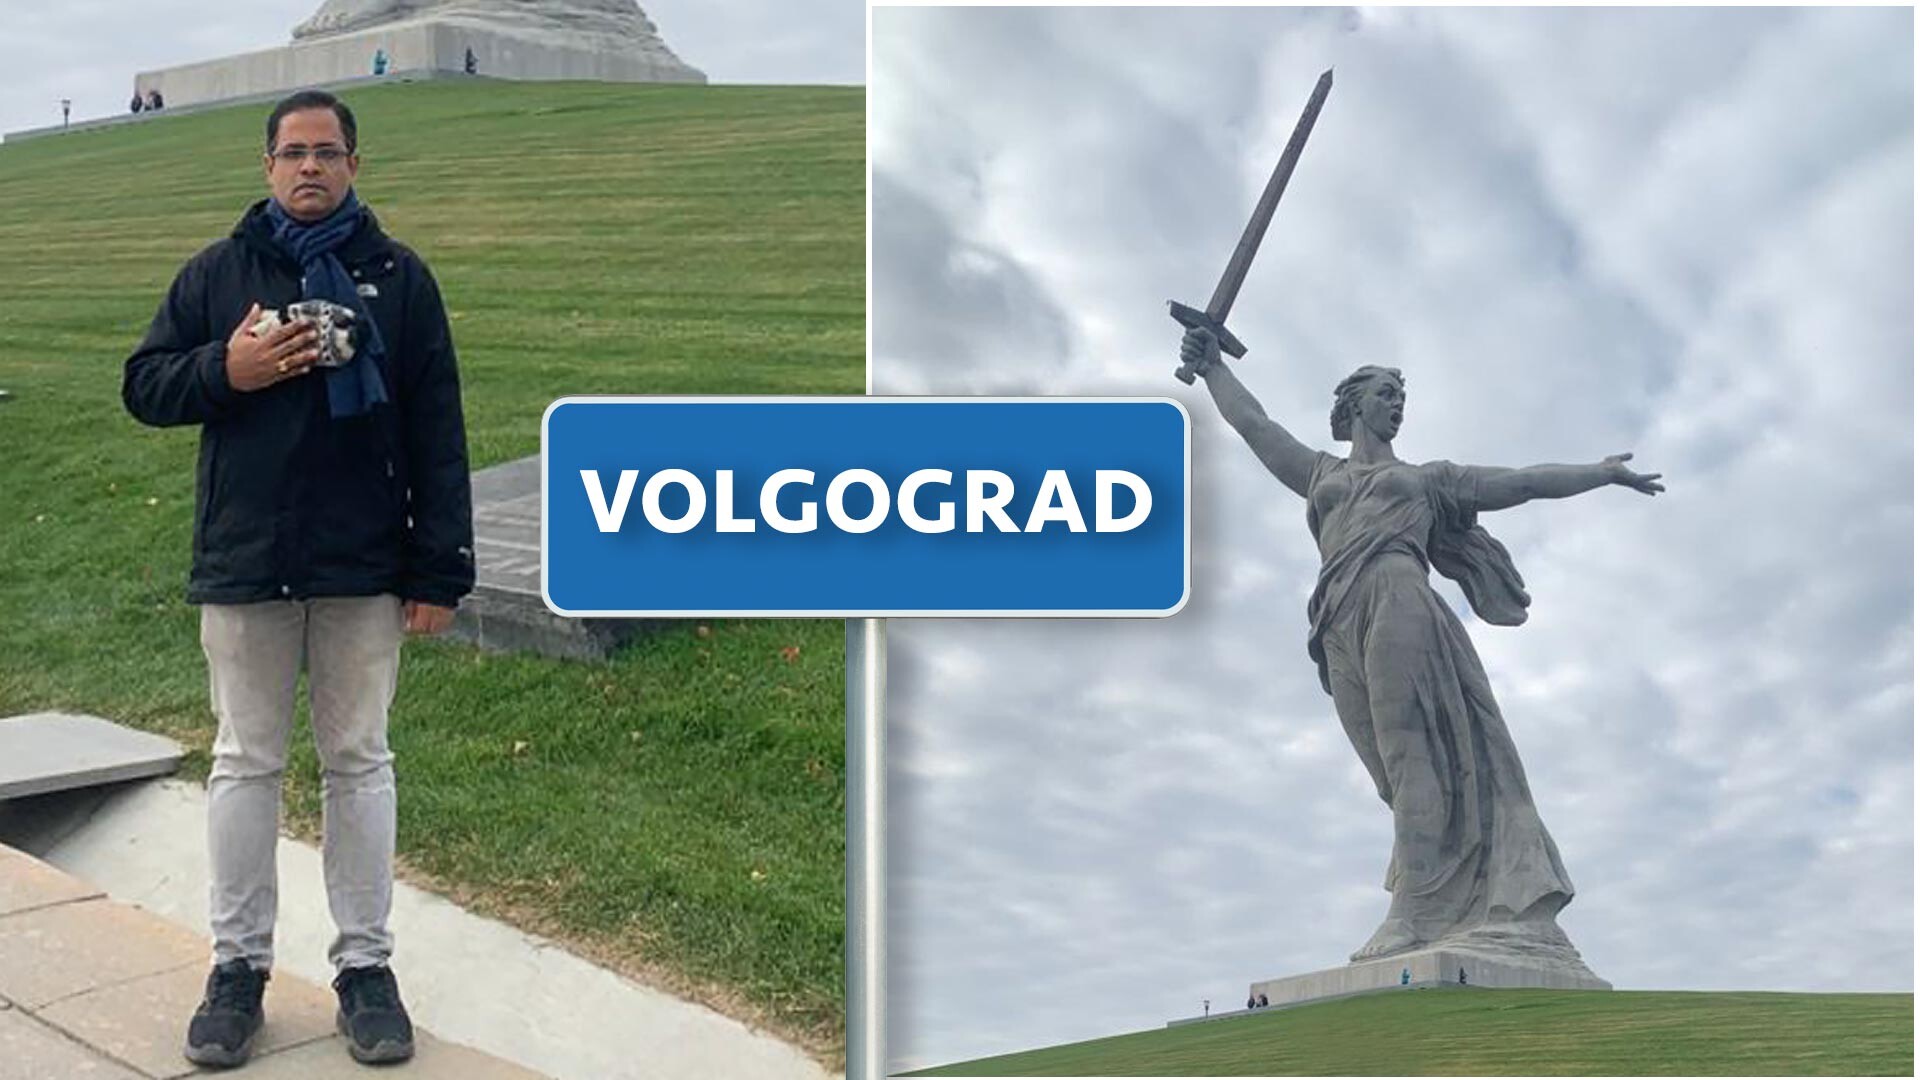 My Lifelong Dream To Visit Volgograd The City Of Heroes Came